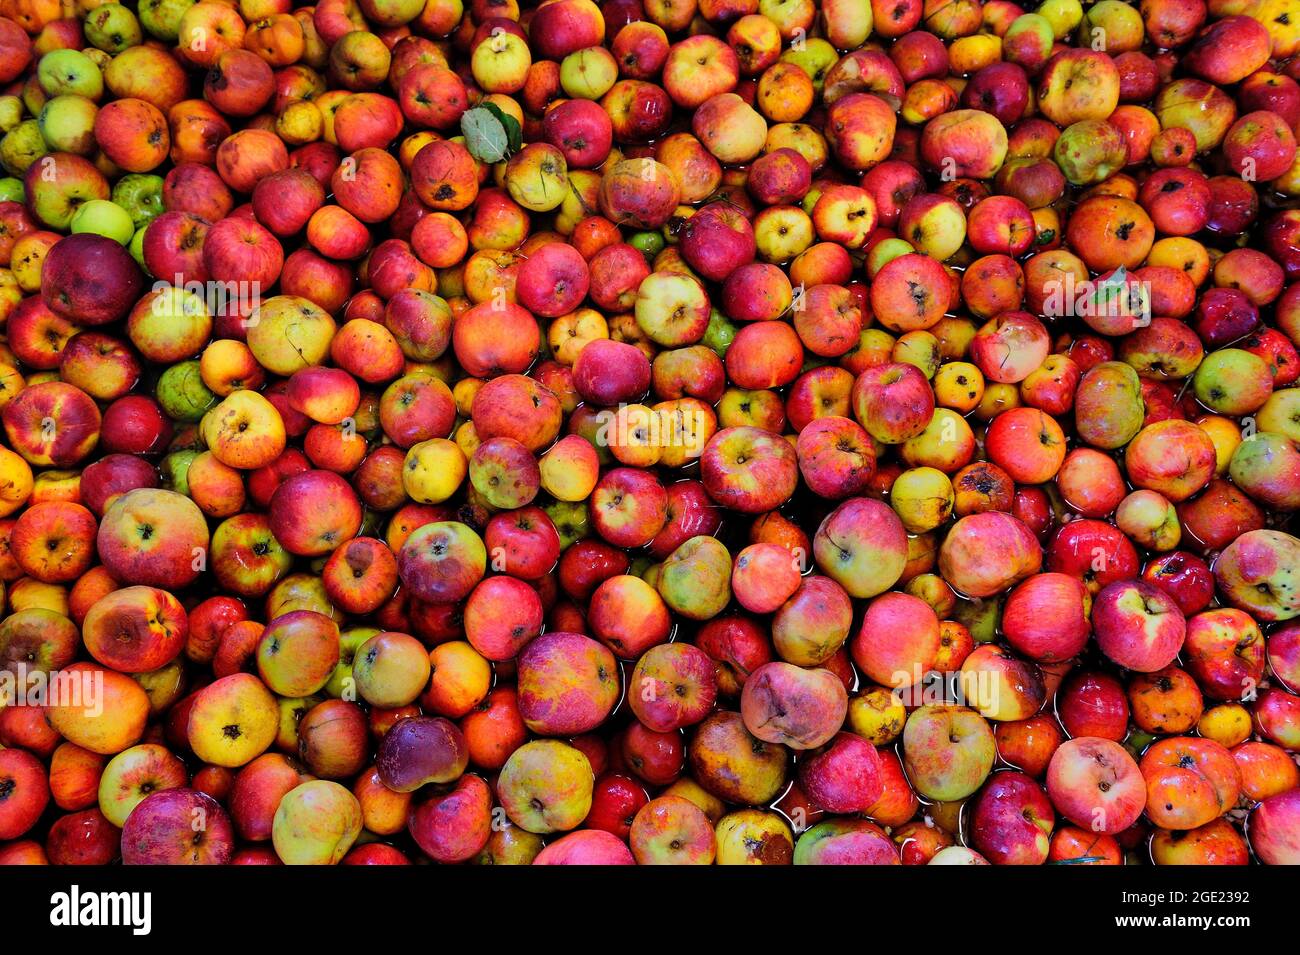 FRANCE, SEINE-ET-MARNE (77), COUNTRY OF BRIE, VERDELOT, FARM OF BONNERIE, GROWER OF APPLES, CIDER AND APPLE JUICE, PRESSING APPLES BROUGHT BY VISITORS Stock Photo